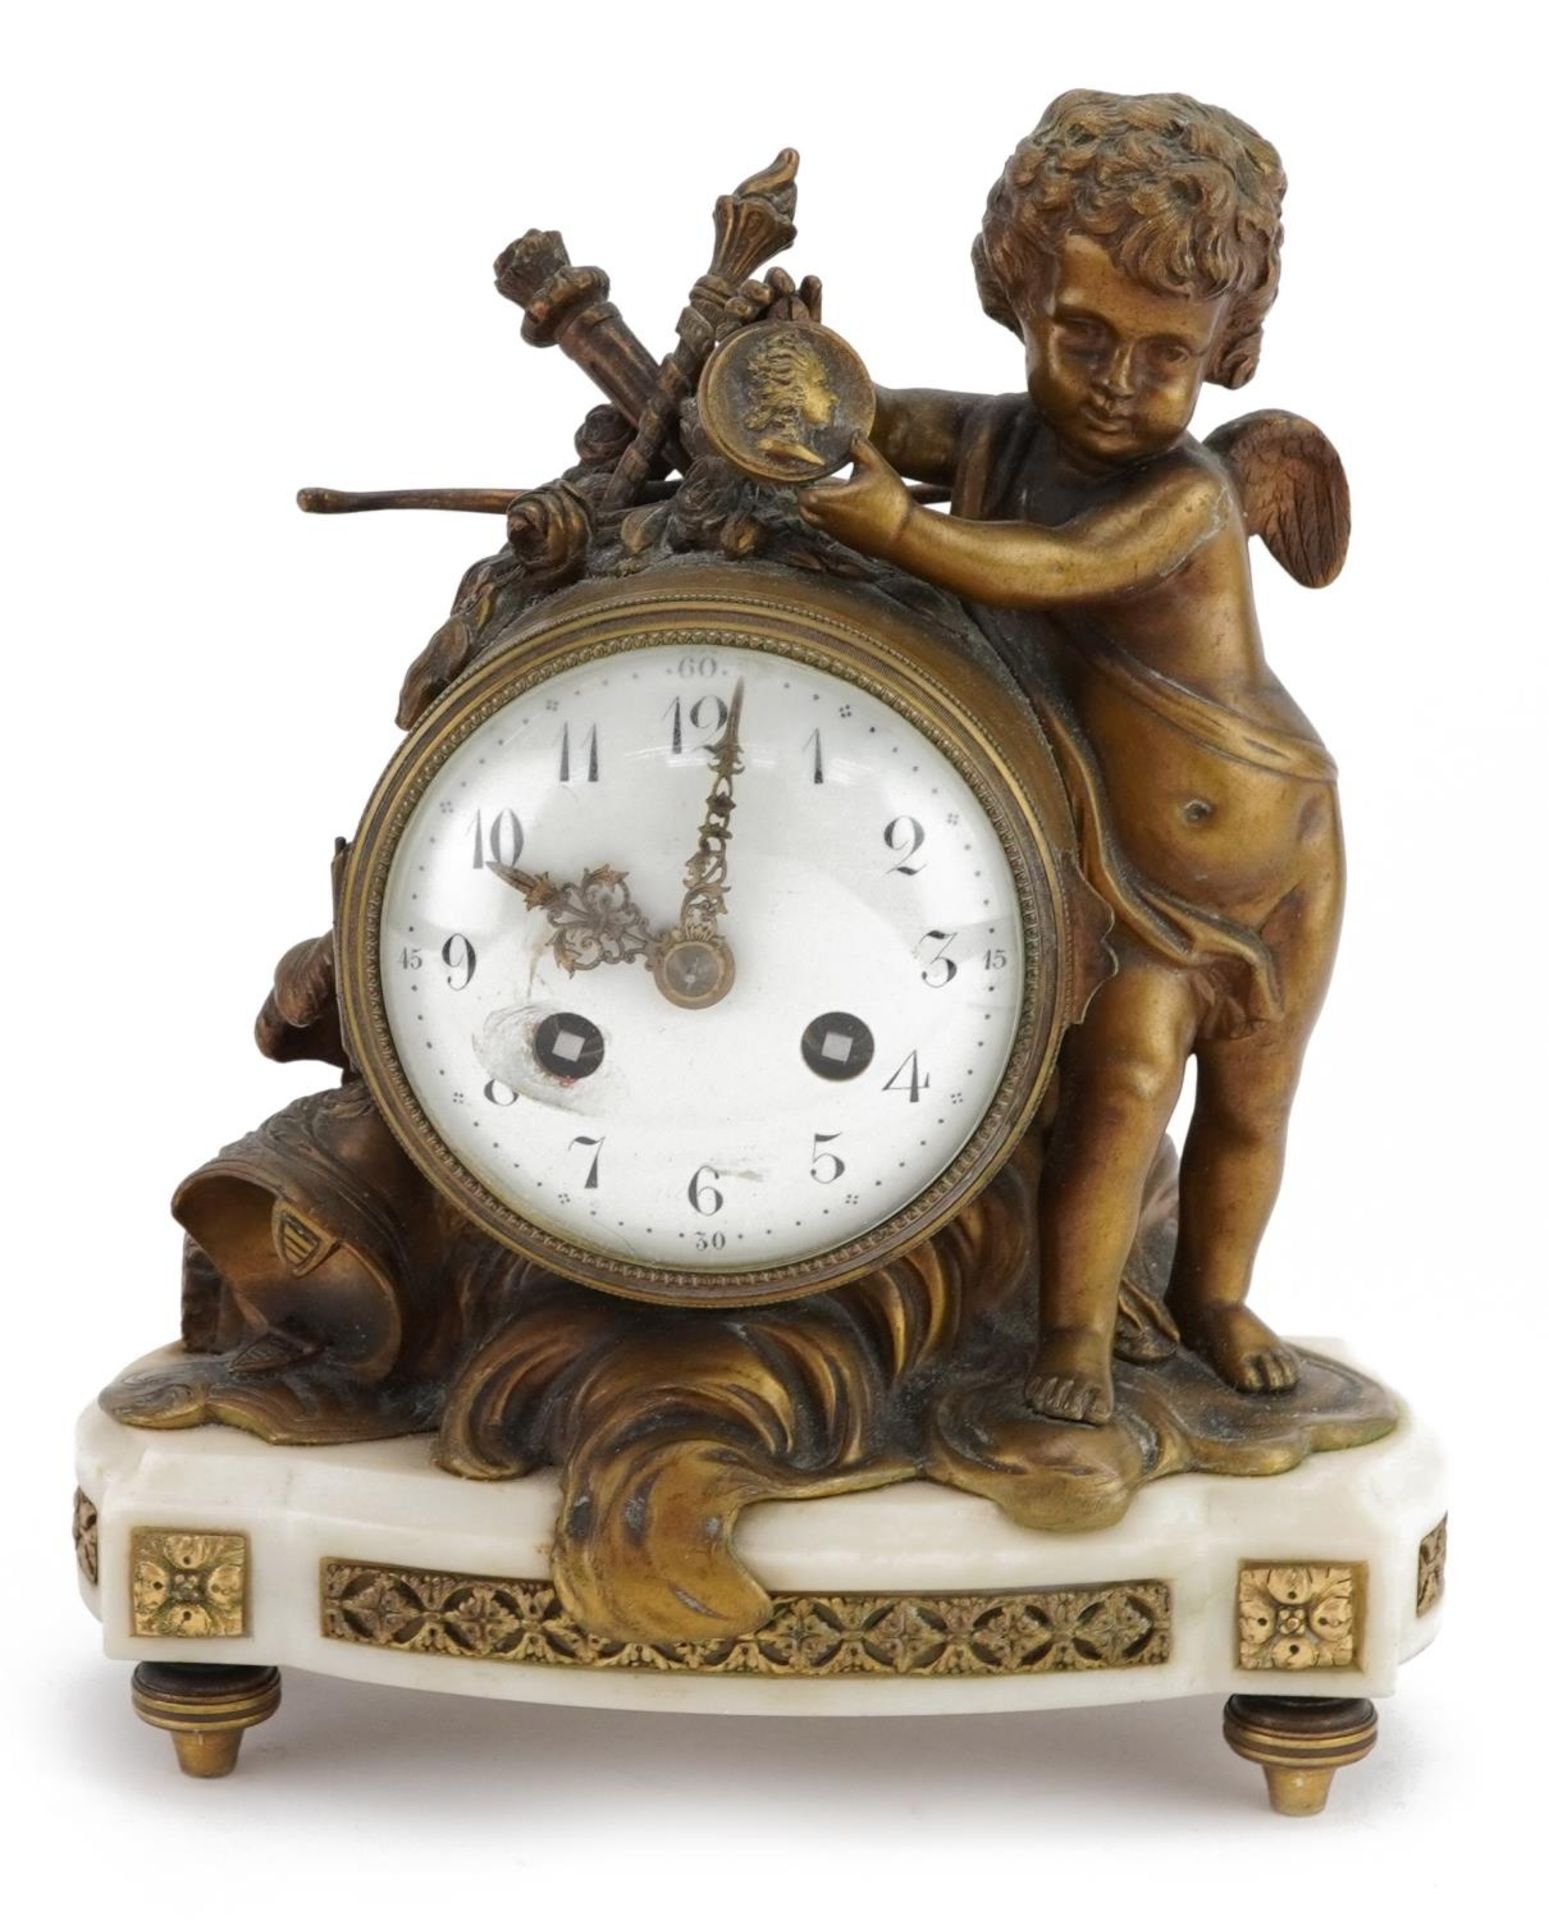 19th century French bronze and marble Putti design mantle clock with circular enamelled dial - Image 2 of 4